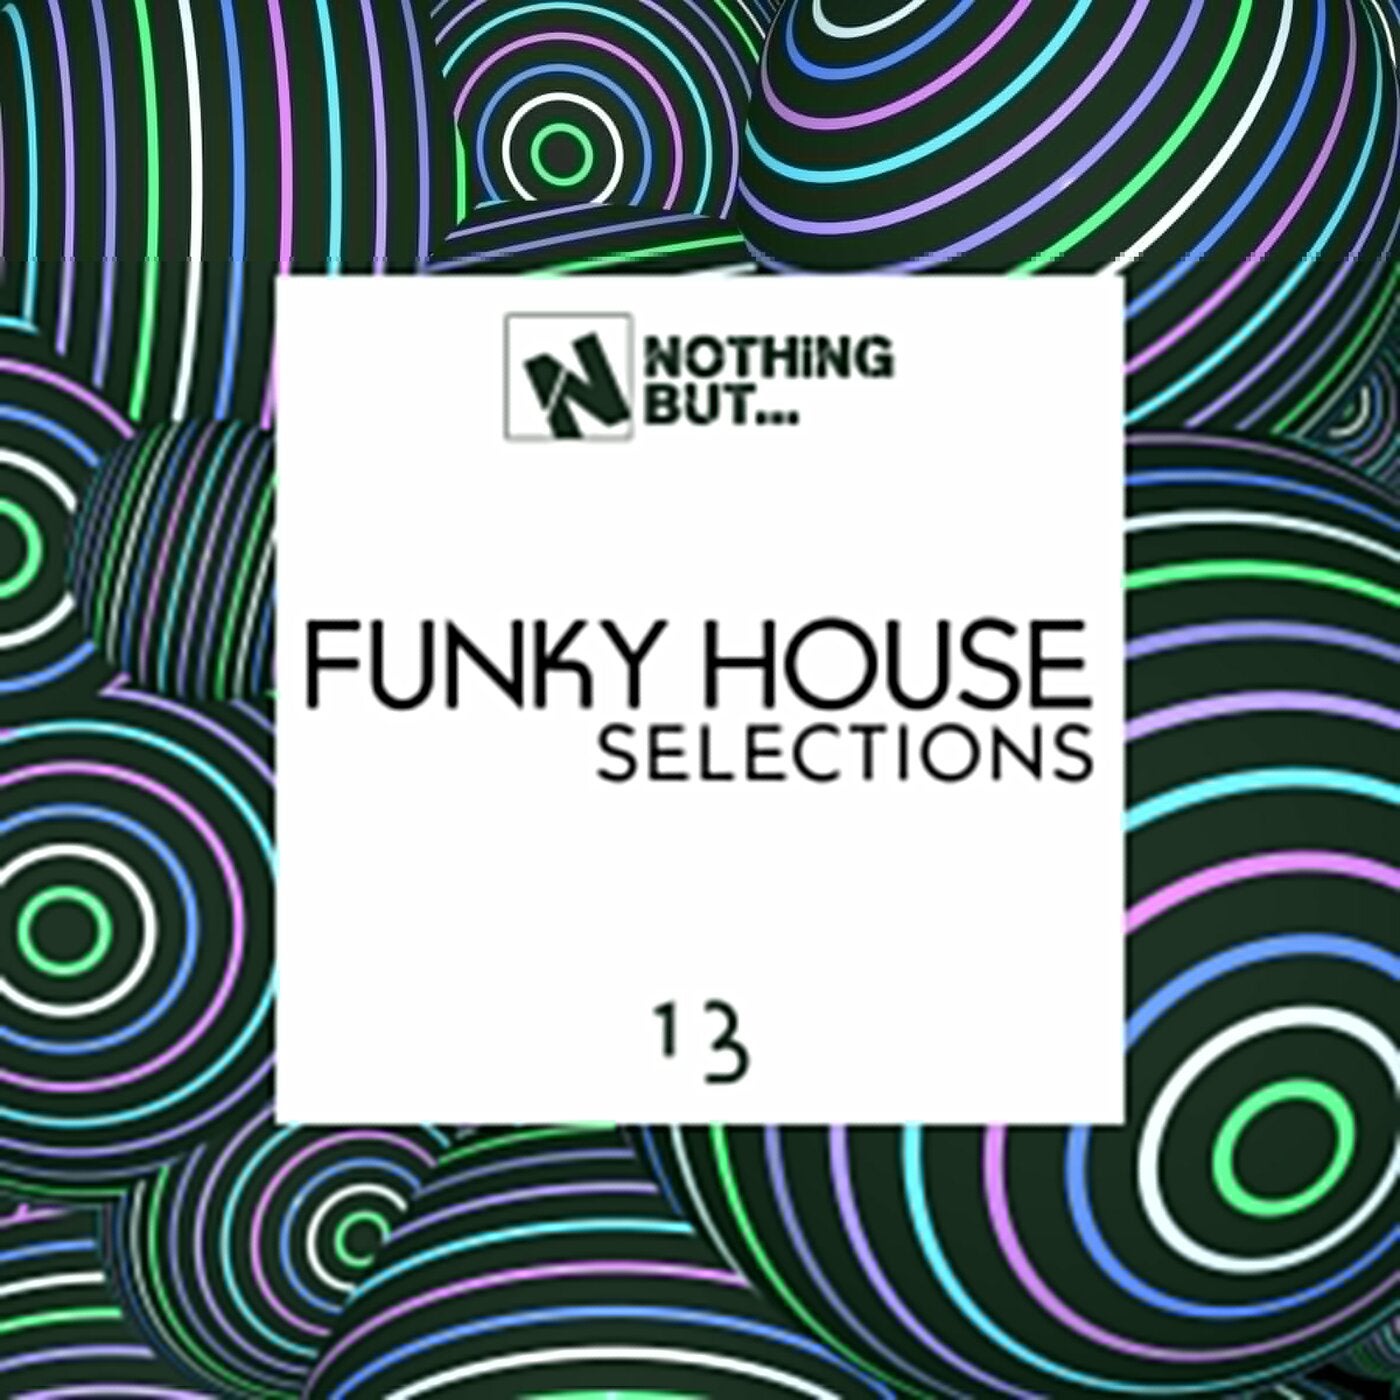 Nothing But... Funky House Selections, Vol. 13